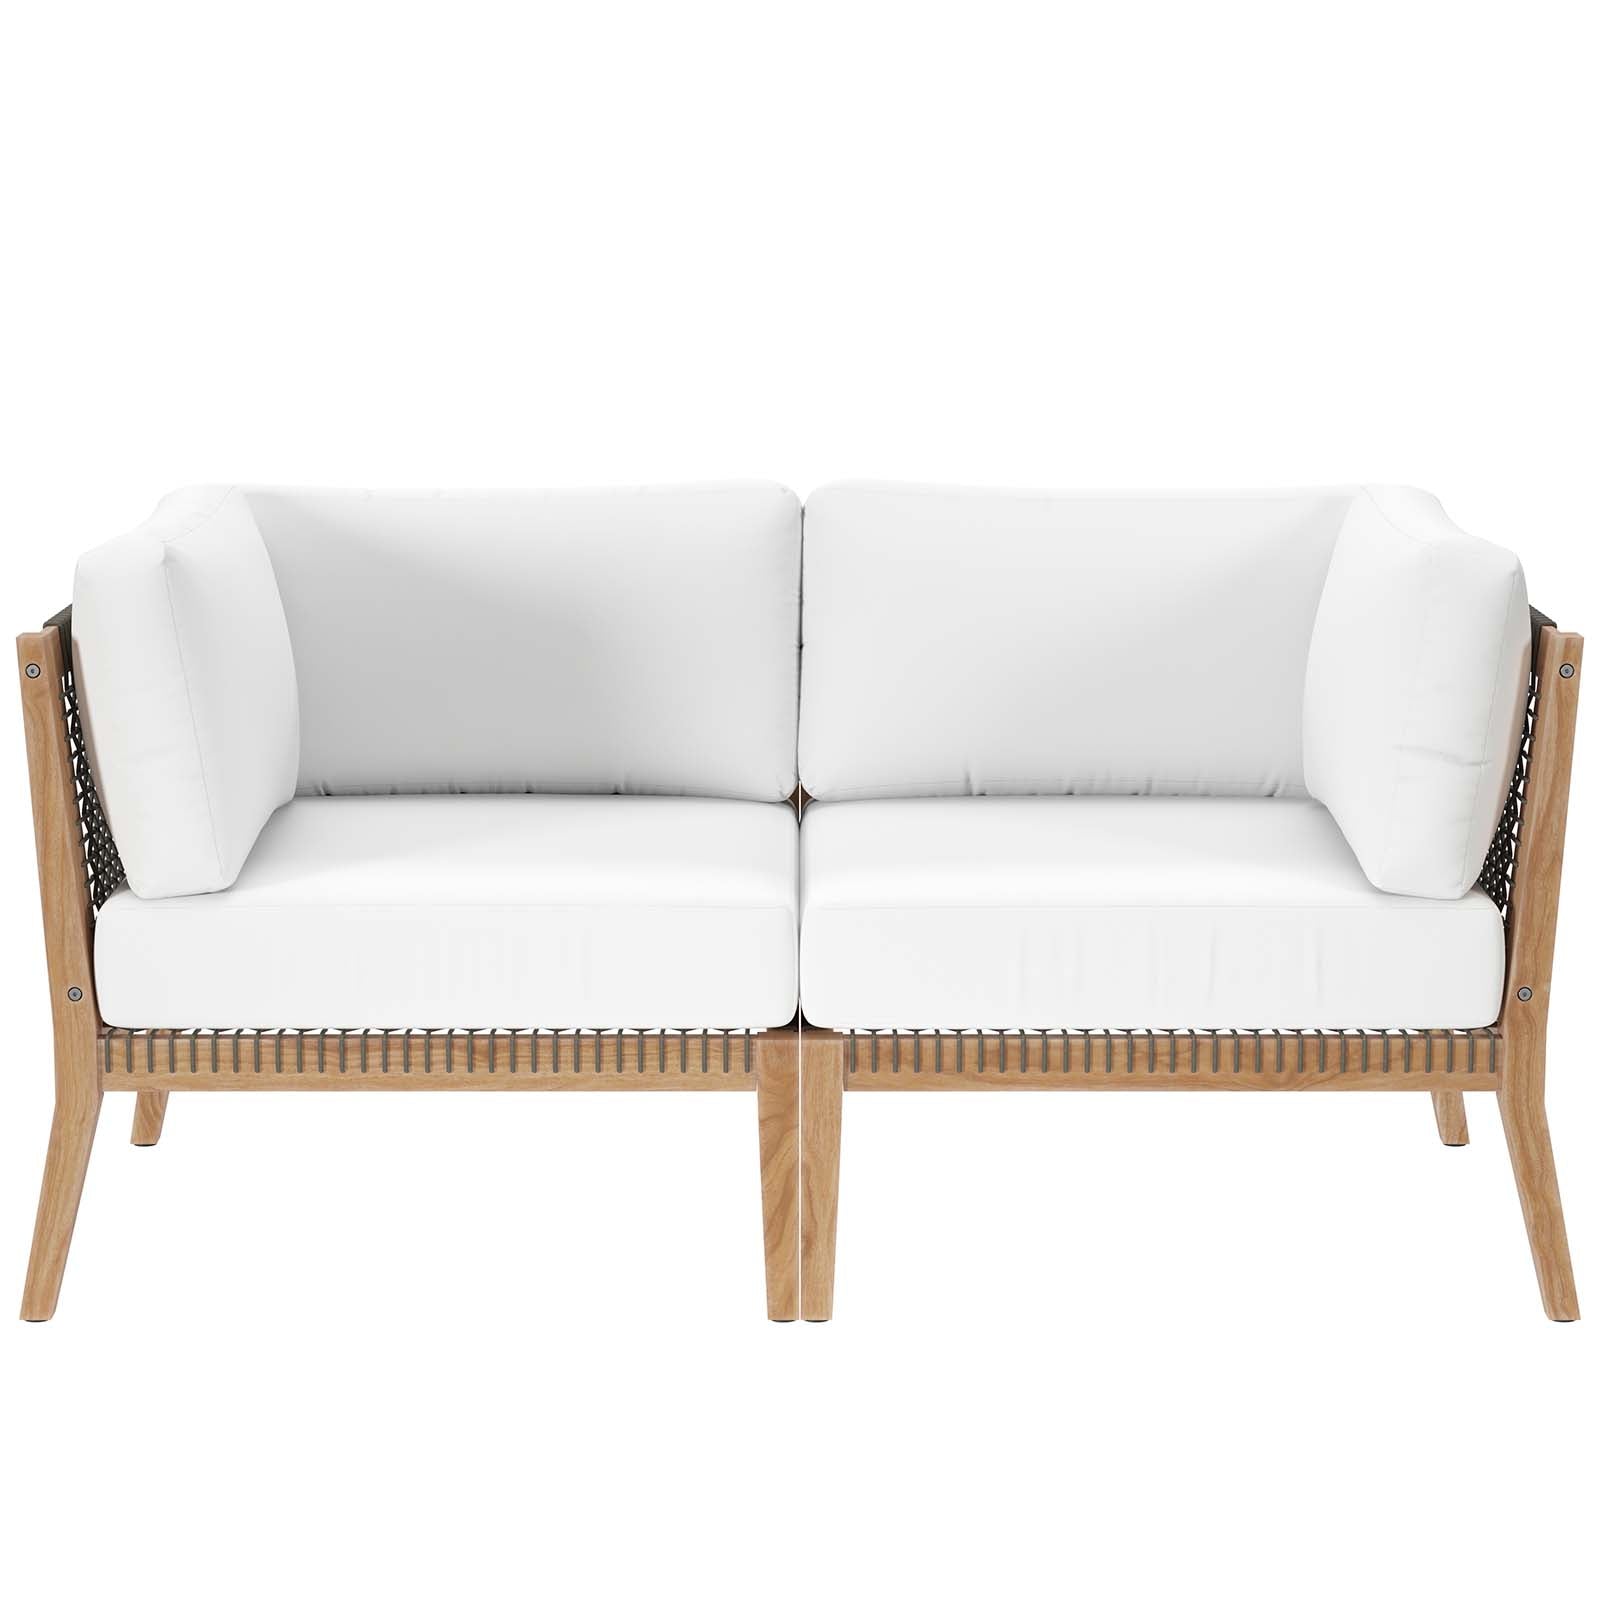 Modway Outdoor Sofas - Clearwater-Outdoor-Patio-Teak-Wood-Loveseat-Gray-White